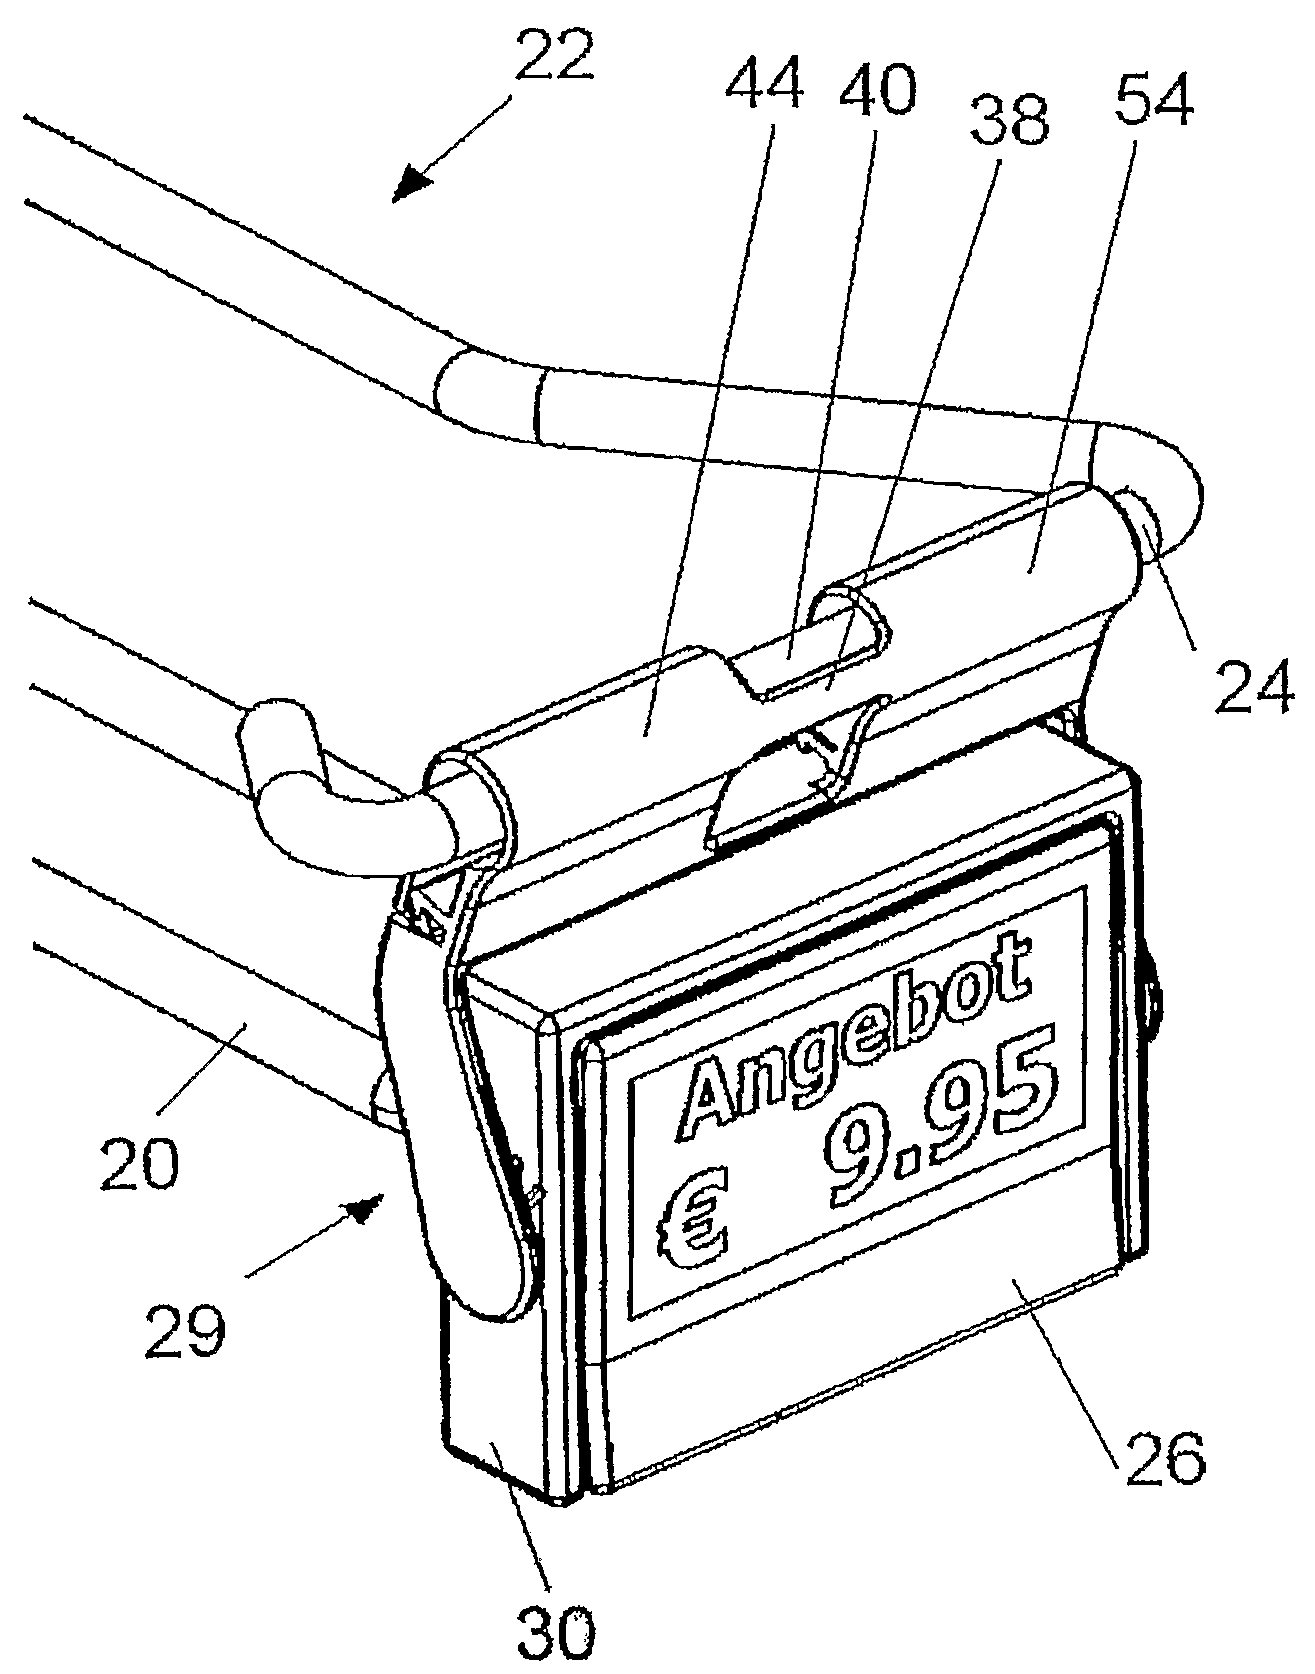 Adapter for attaching an electronic shelf label to a blister hook